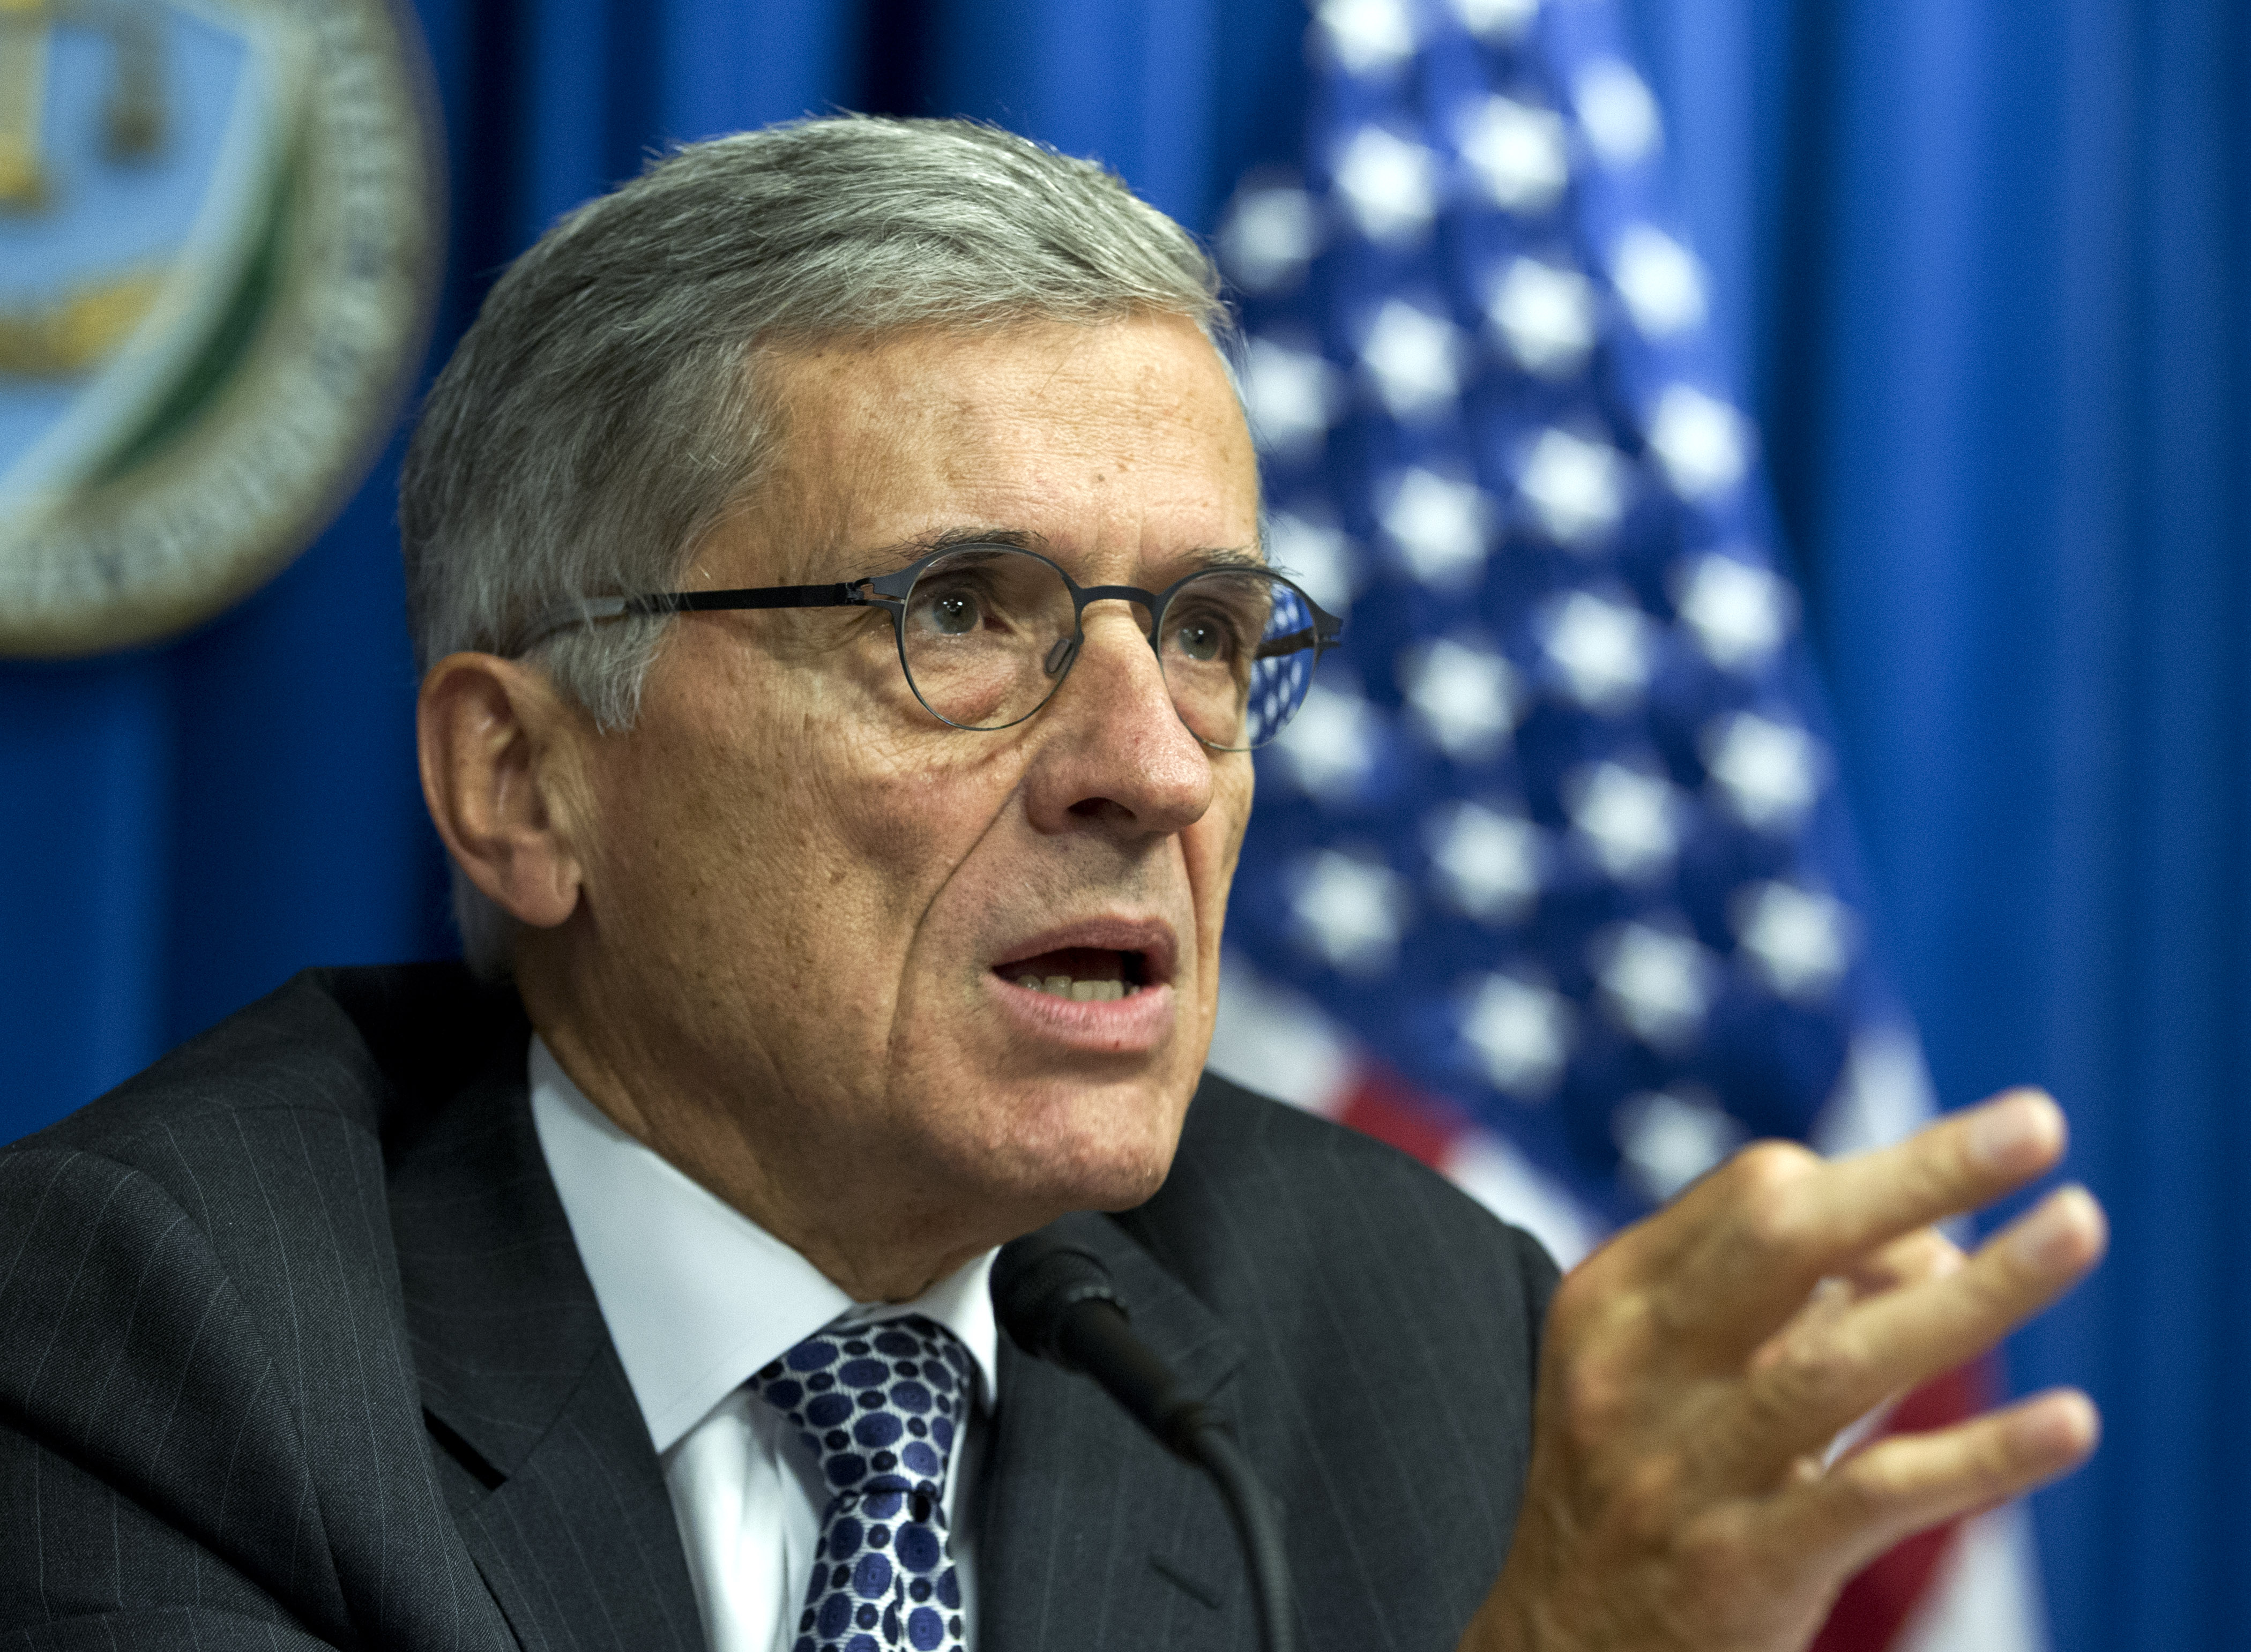 Federal Communications Commission (FCC) Chairman Tom Wheeler speaks during new conference in Washington on Oct. 8, 2014. (Jose Luis Magana—AP)